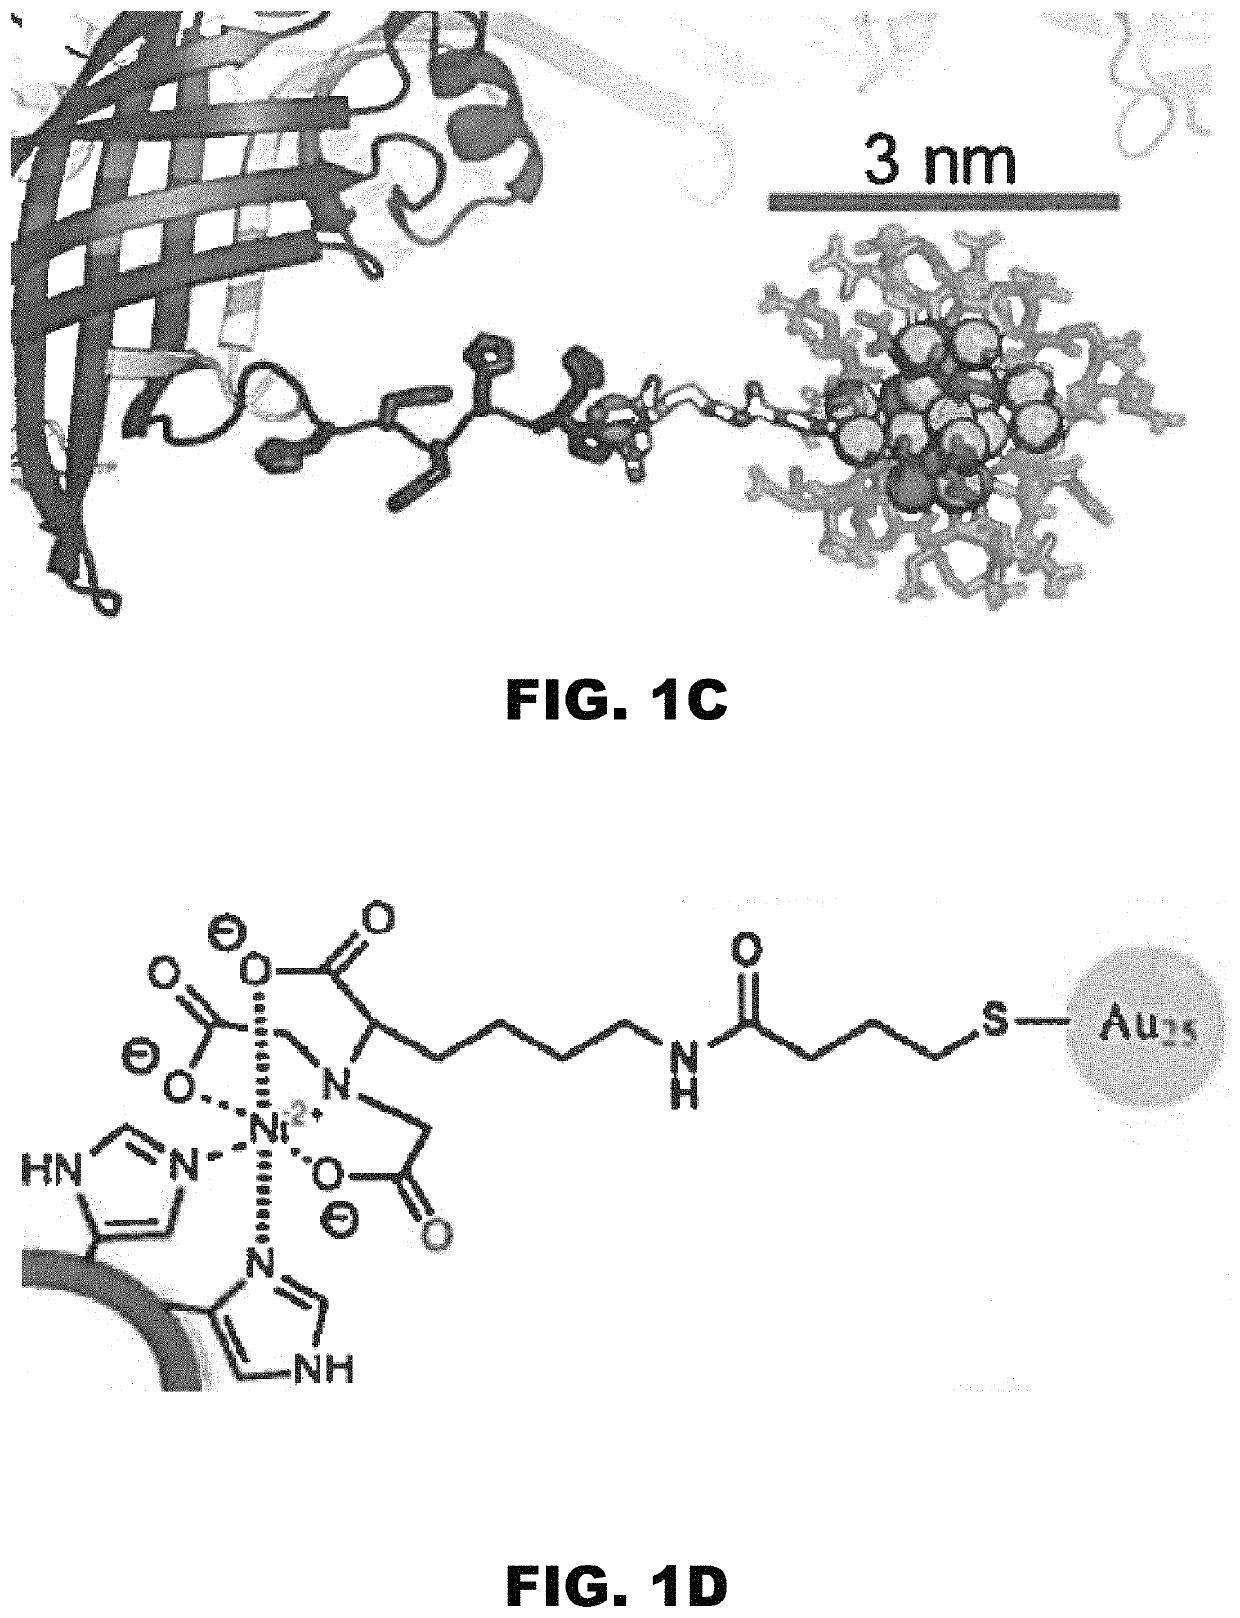 Engineered programmable molecular scaffolds from porous protein crystals